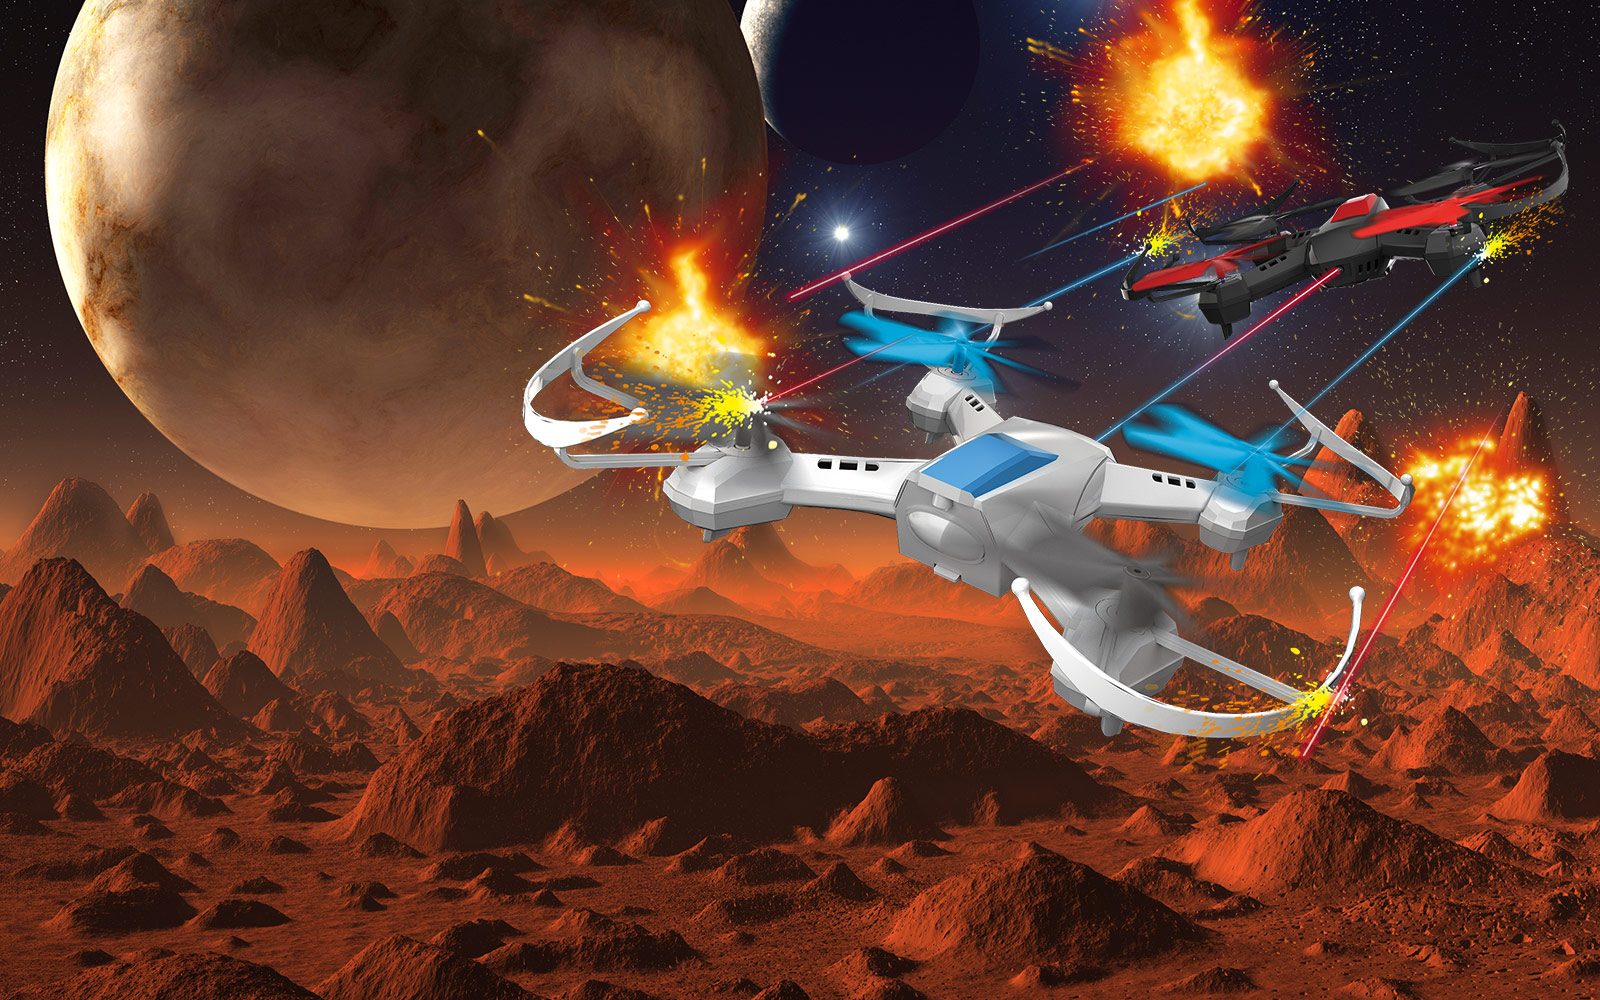 Illustrated depiction of DGL Toys' Quadrone products battling each other over an alien landscape